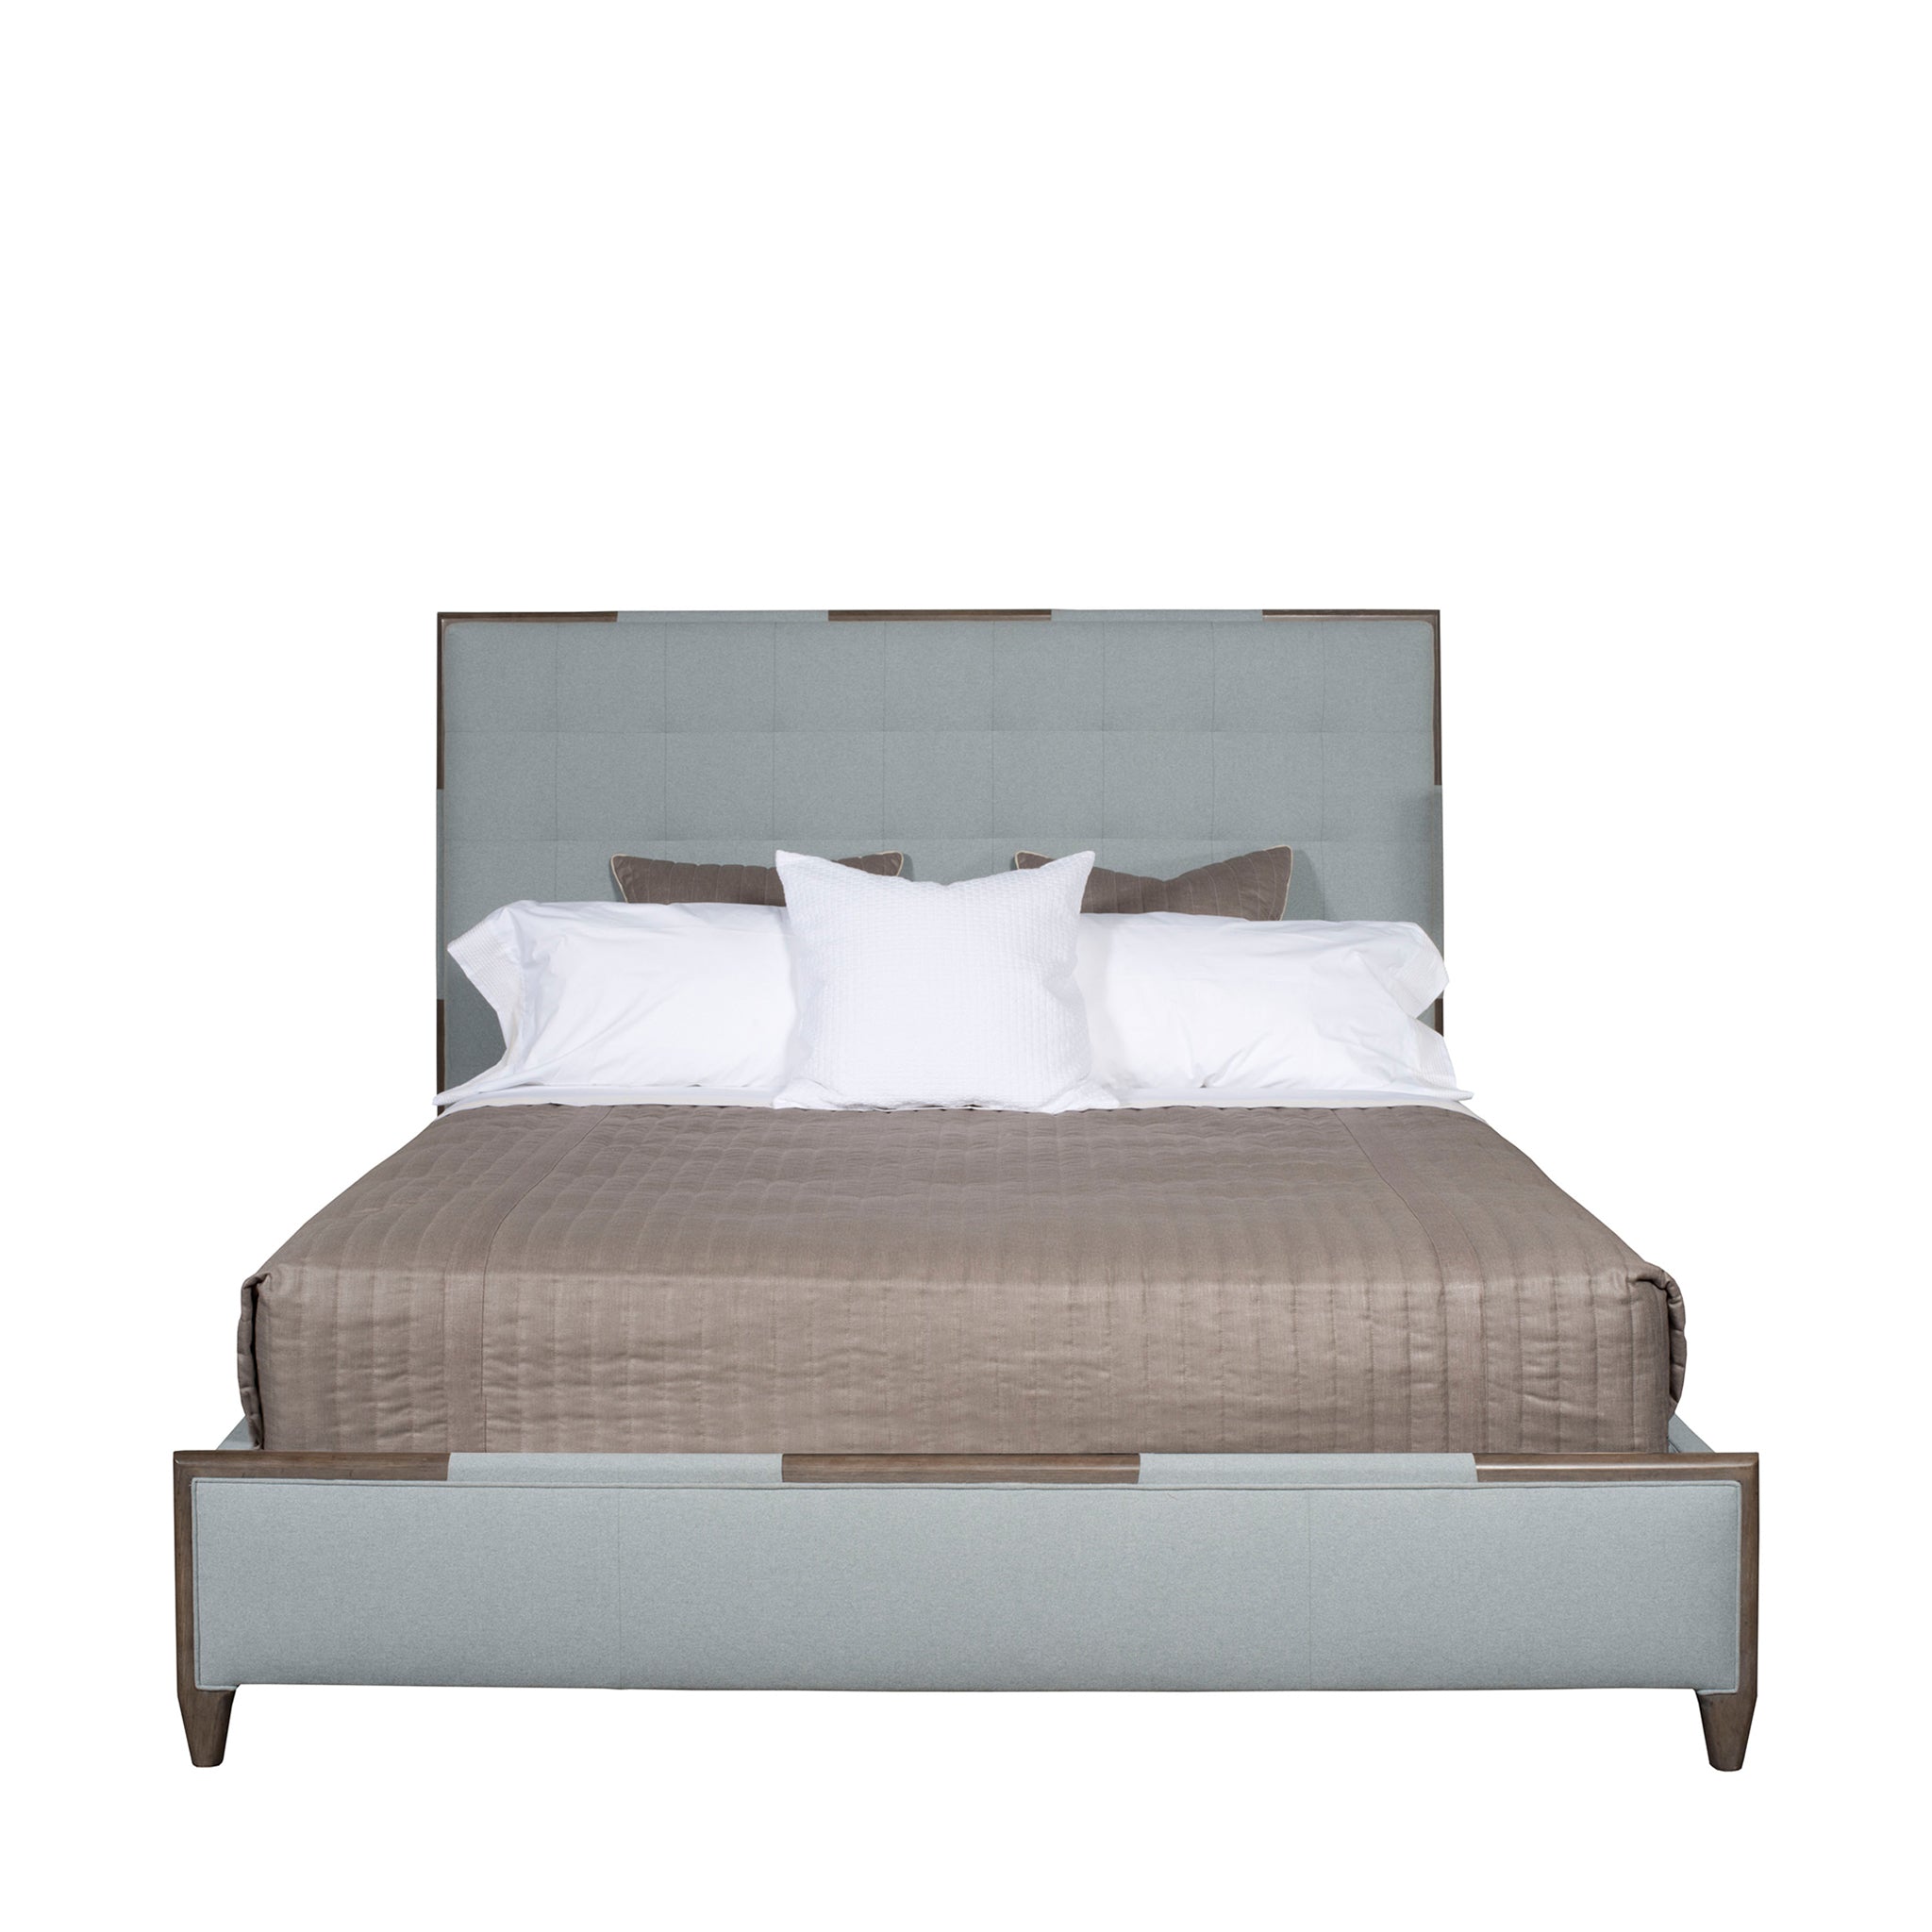 vanguard chatfield king bed beds 